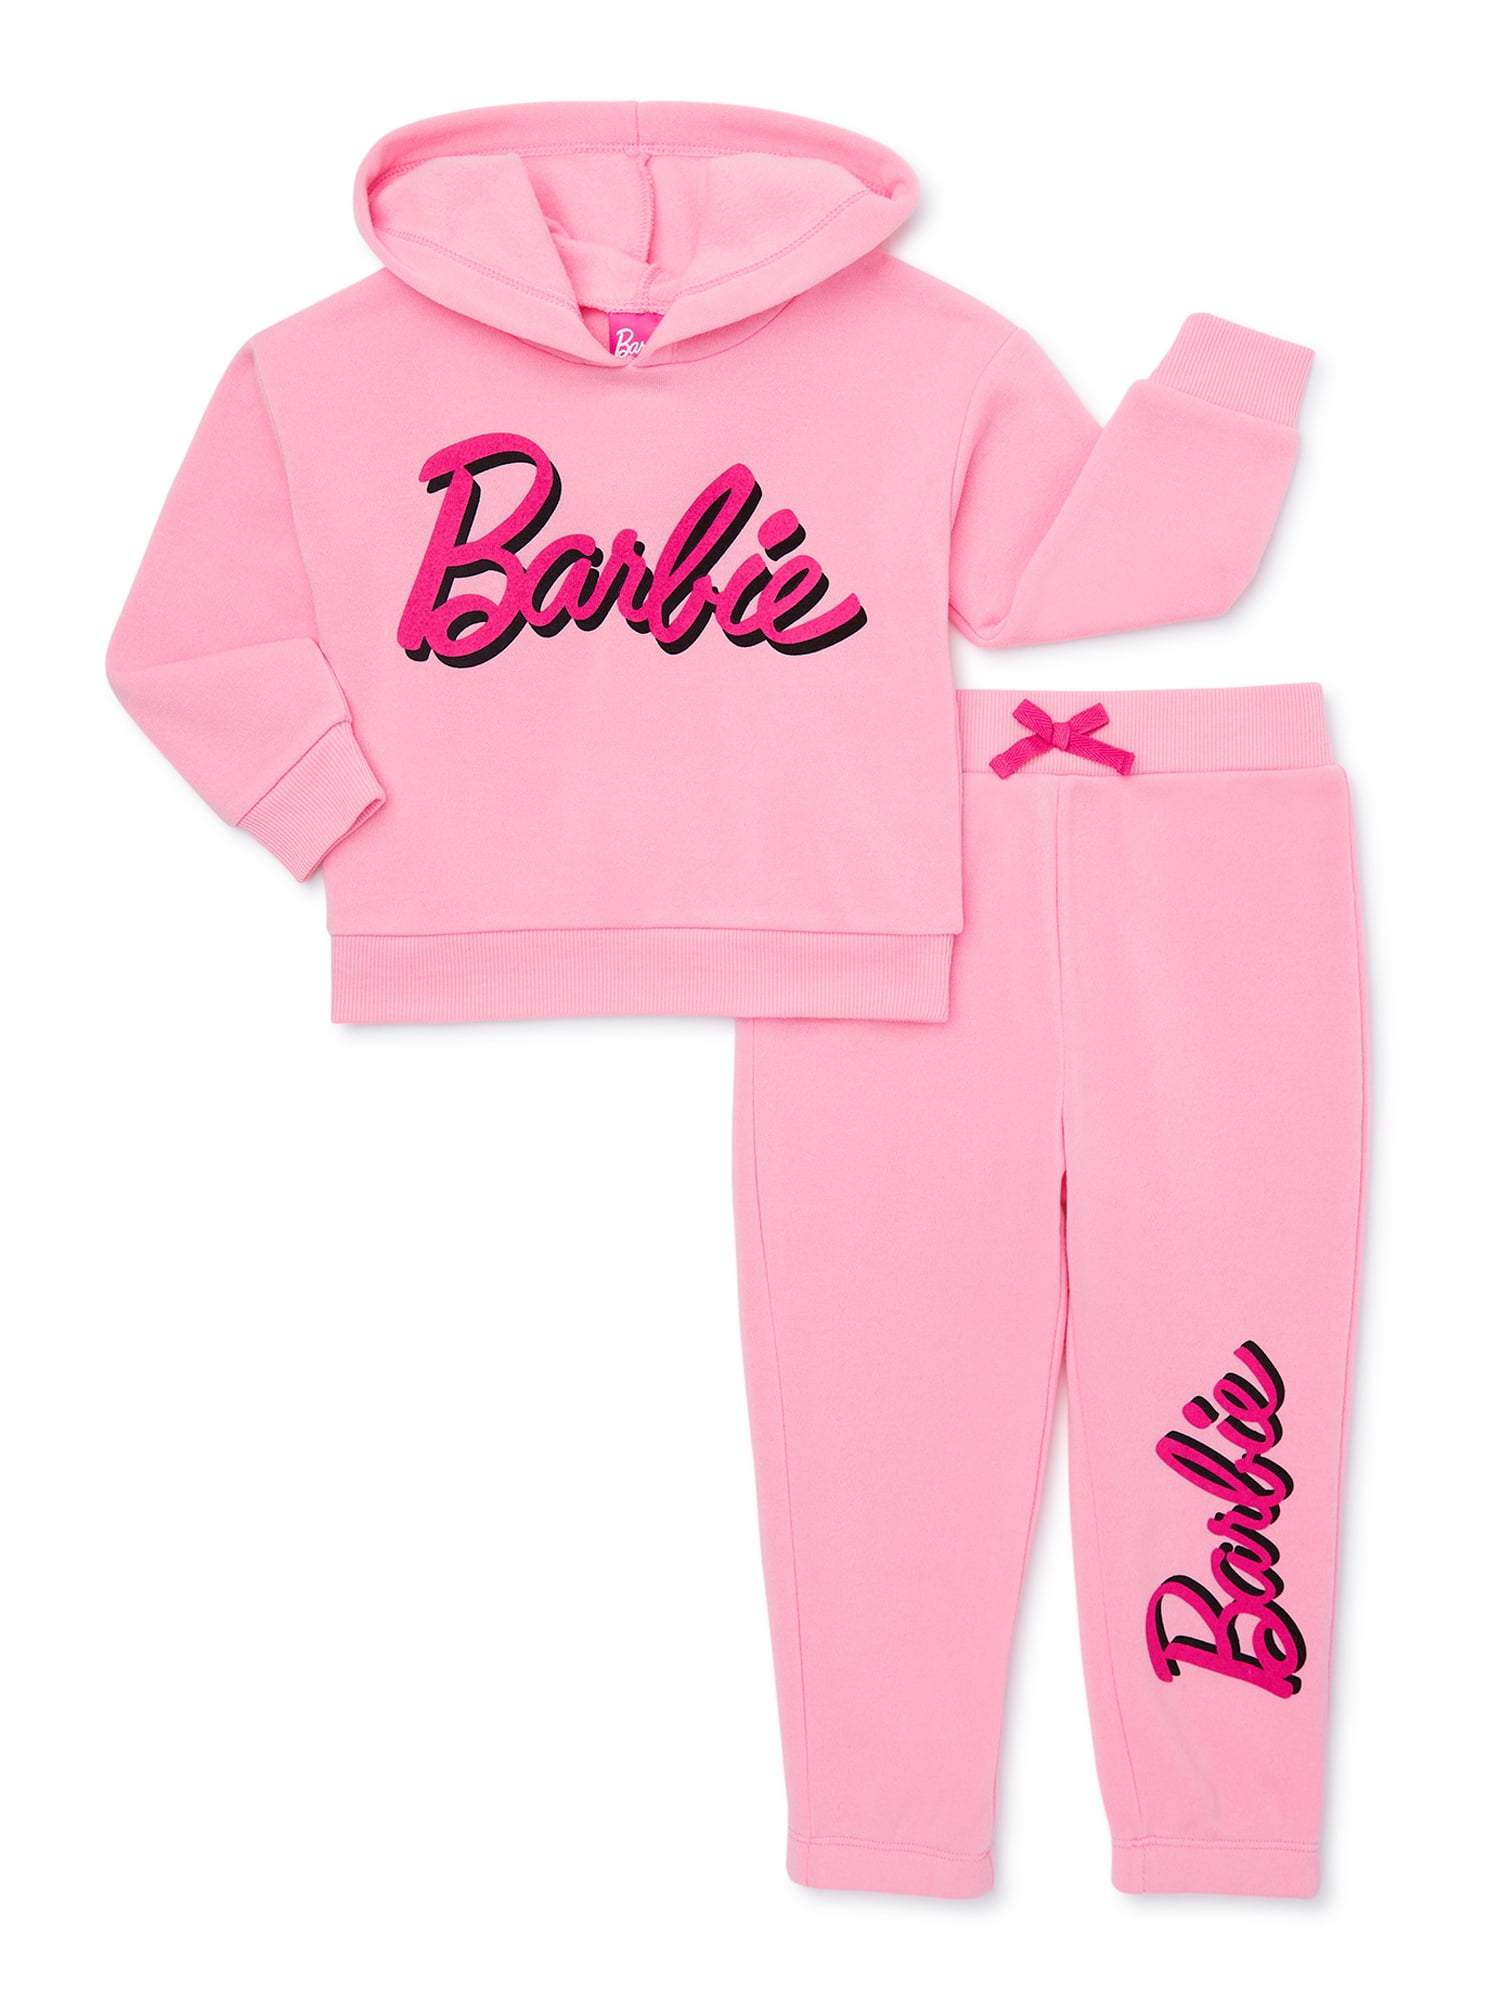 Barbie Girls Hooded Sweatshirt and Joggers, 2-Piece Outfit Set, Sizes 4 ...